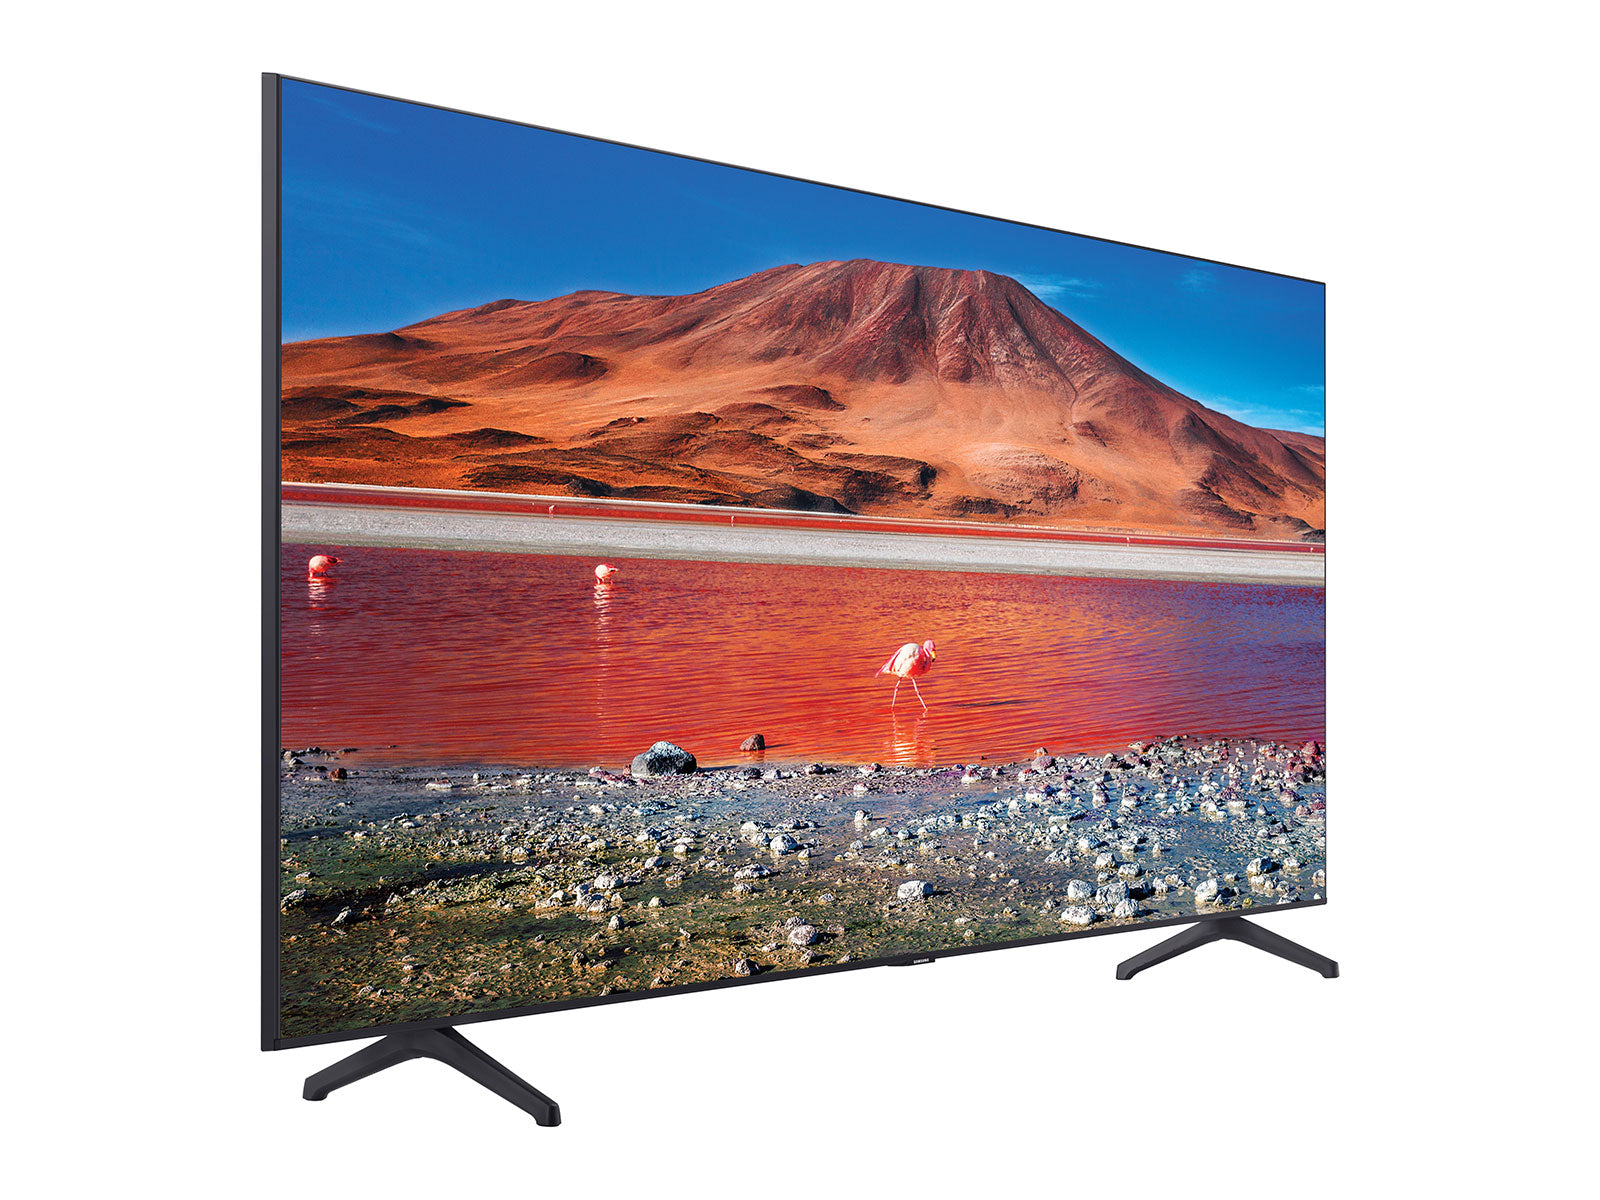 Samsung 70" Class TU7000 Crystal UHD 4K Smart TV (Refurbished) Tv's ONLY for delivery in San Diego and Tijuana